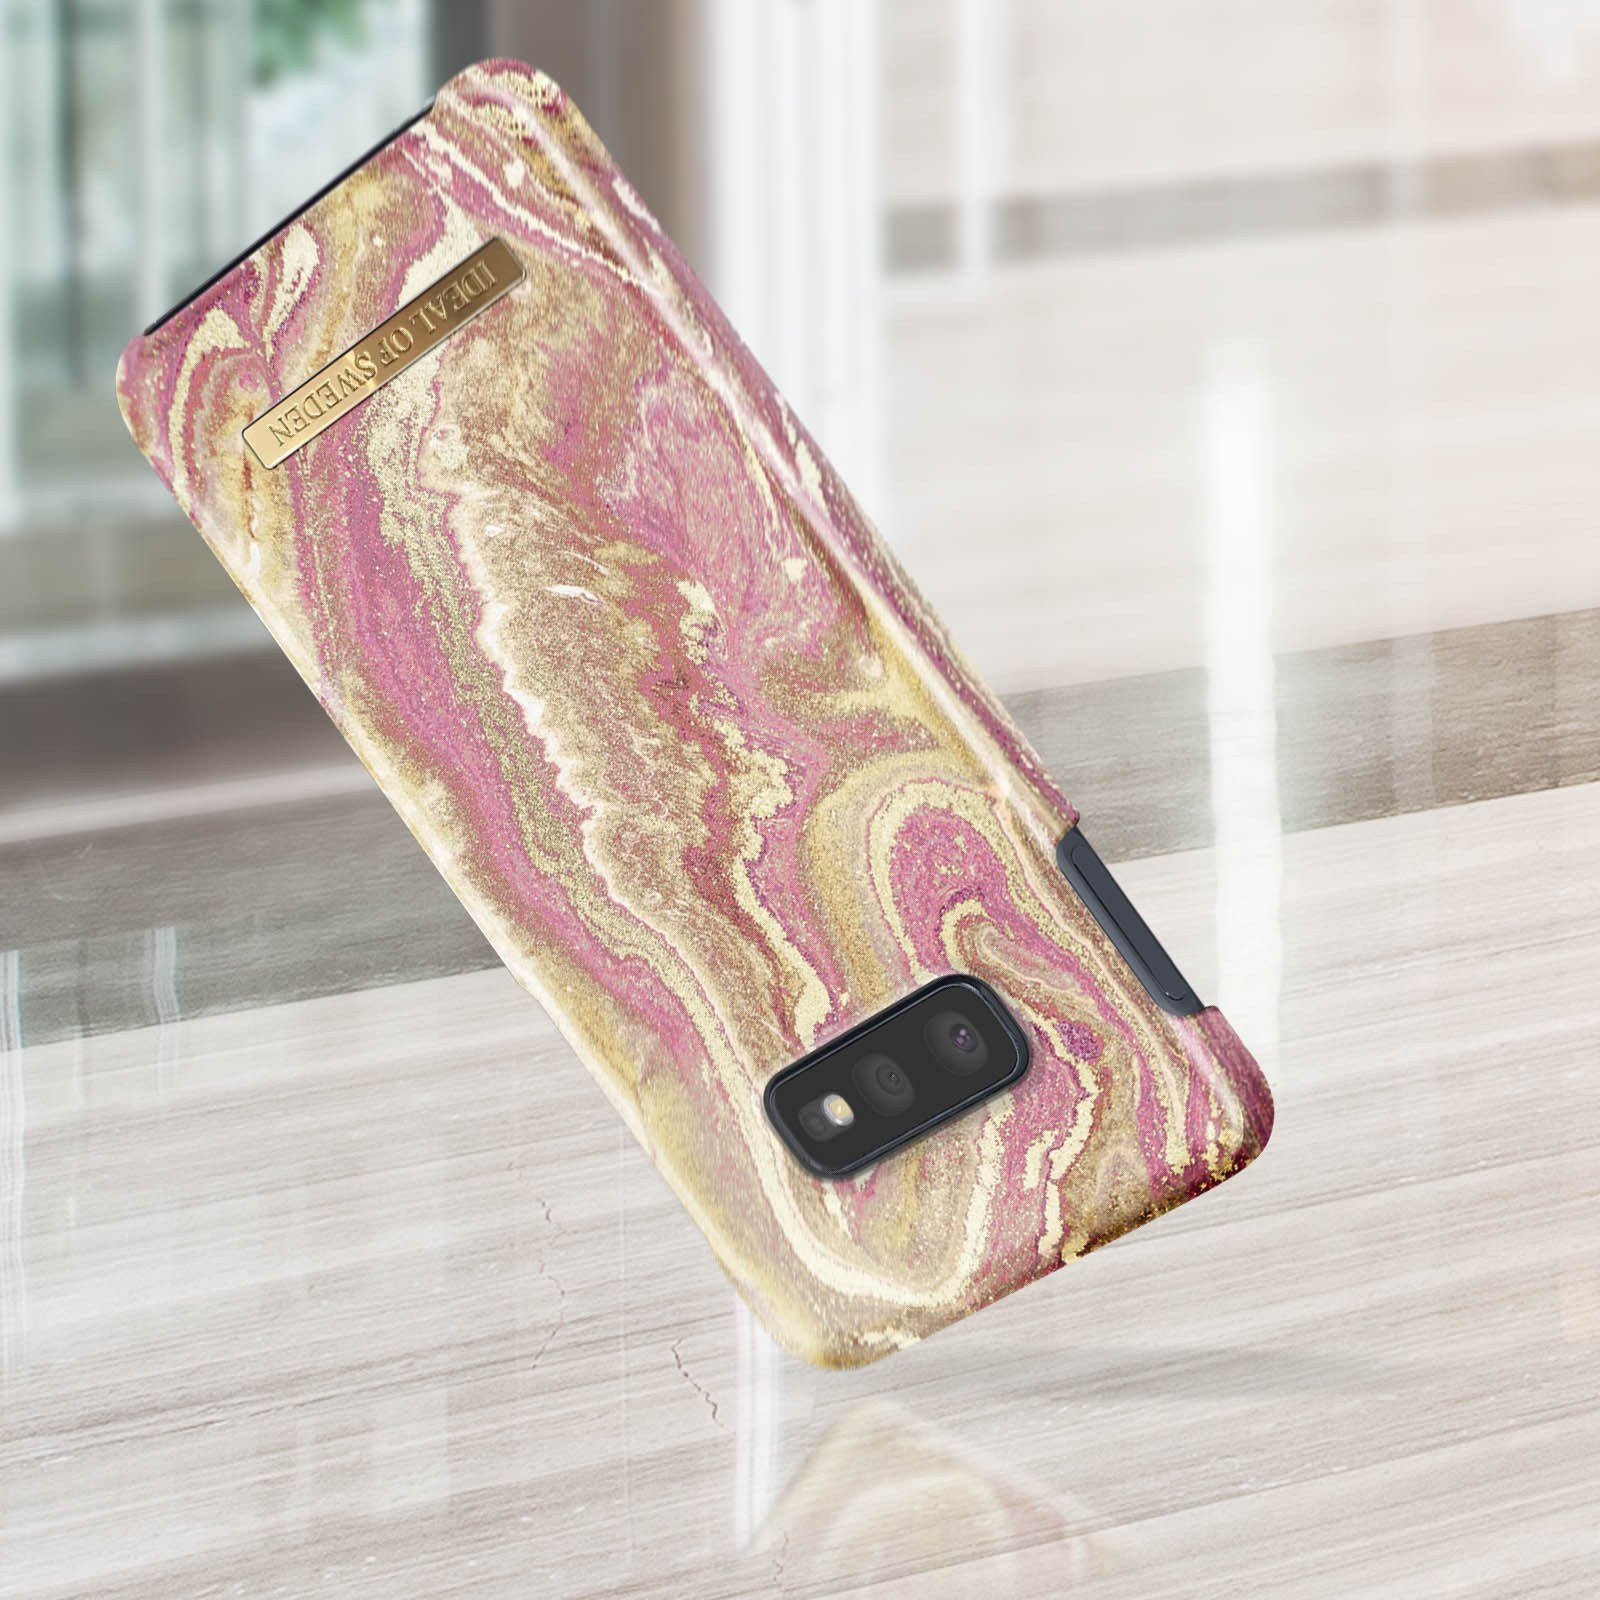 Samsung, Galaxy IDEAL IDFCSS19-S10L-120, SWEDEN OF Marble Blush Backcover, Golden S10E,